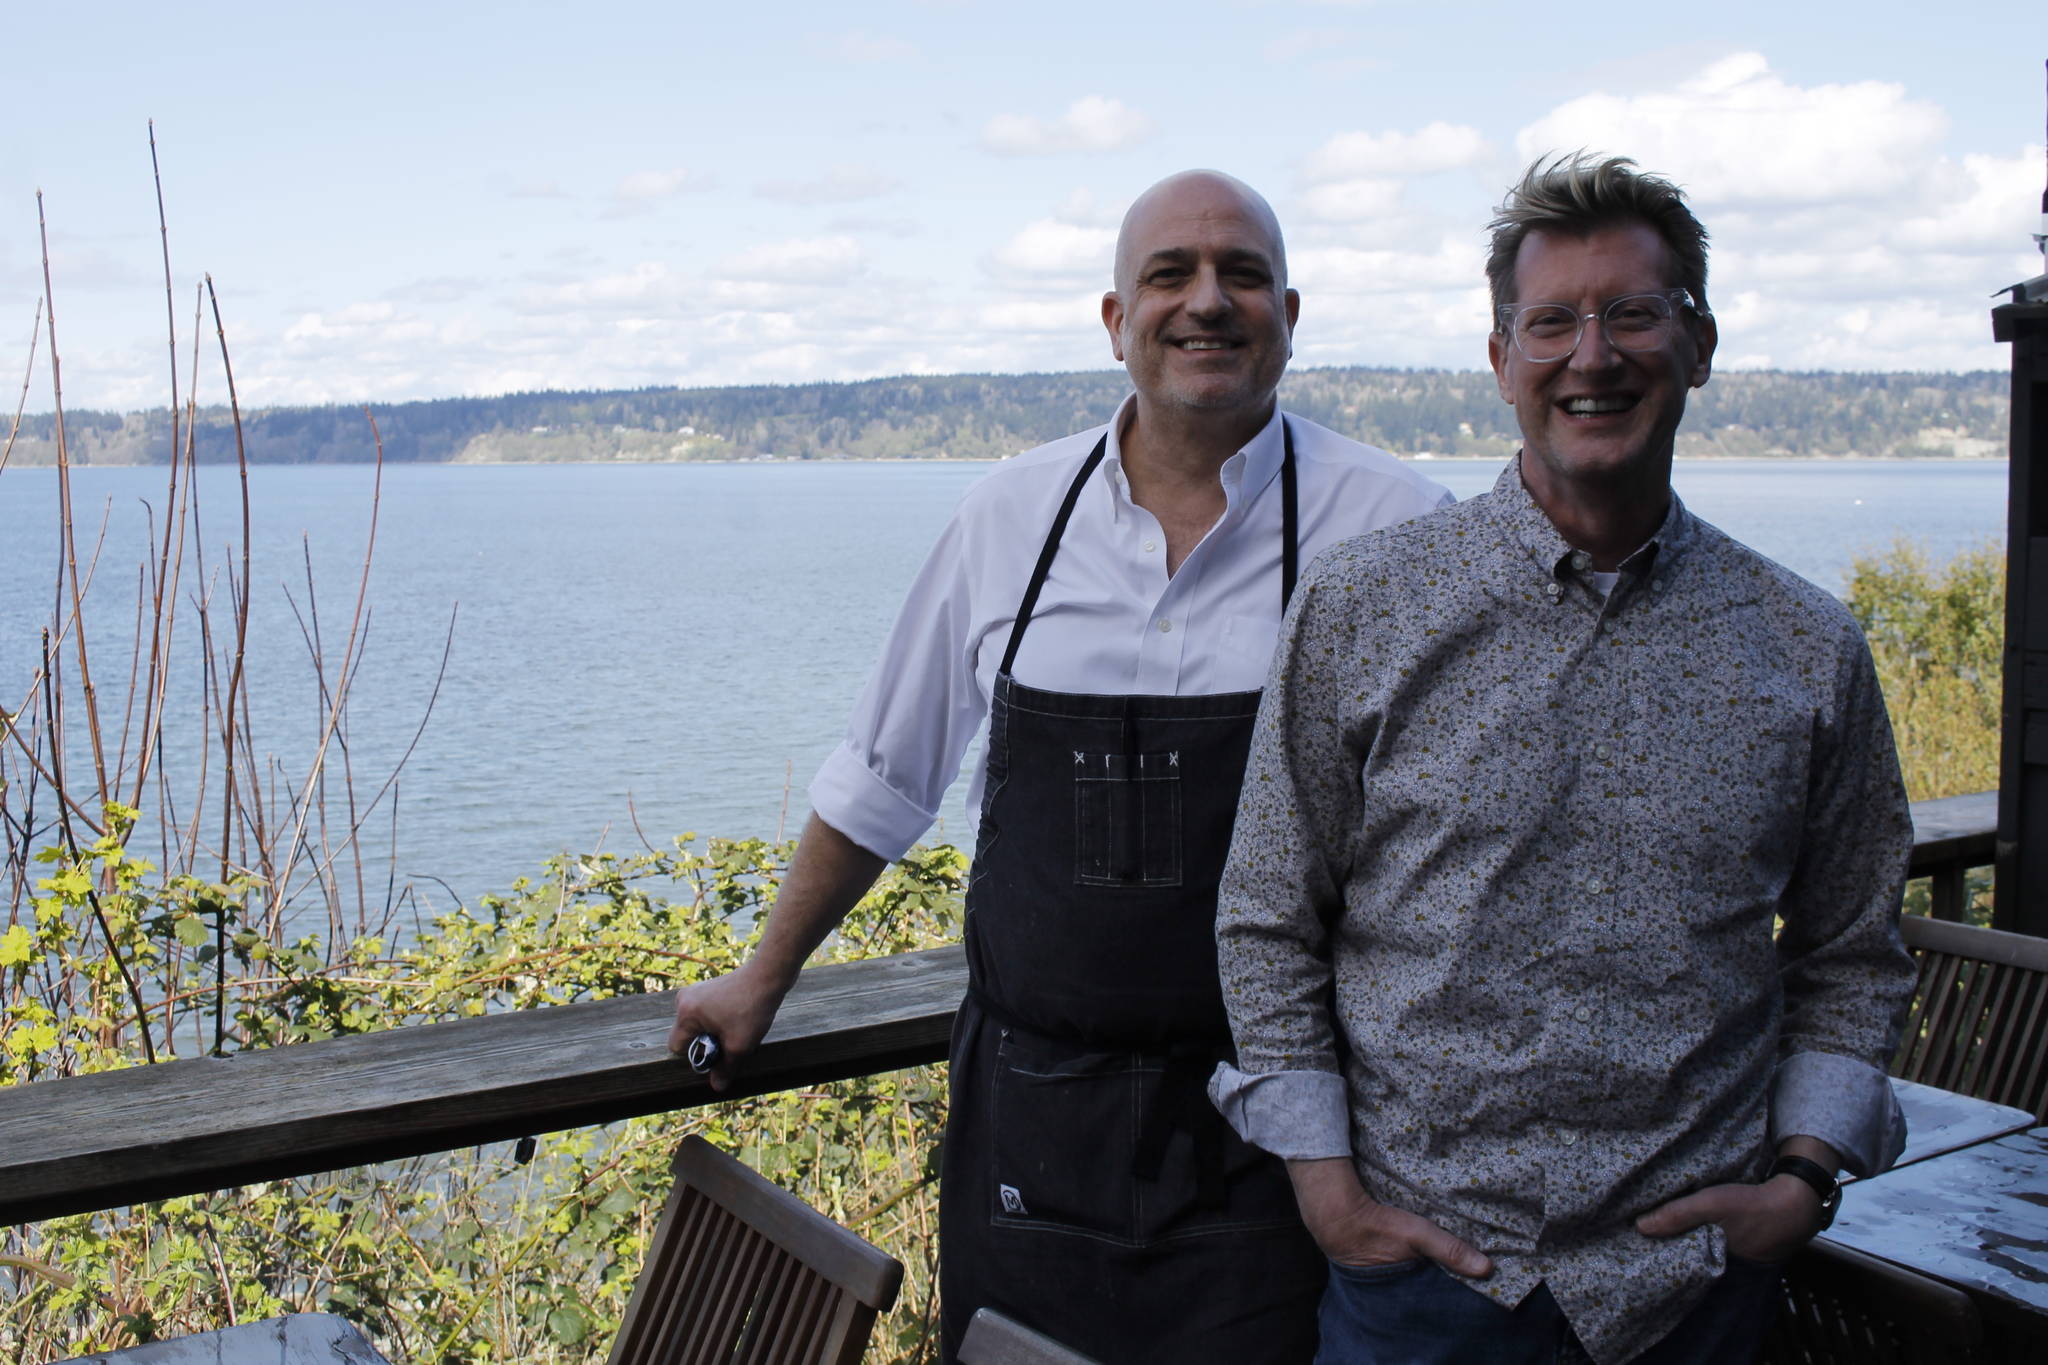 Stefen Bosworth, left, and his partner, Ron Rois, are transplants from the Chicago area with roots in the Pacific Northwest. They are the owners of Langley’s newest restaurant, Savory. (Photo by Kira Erickson/South Whidbey Record)